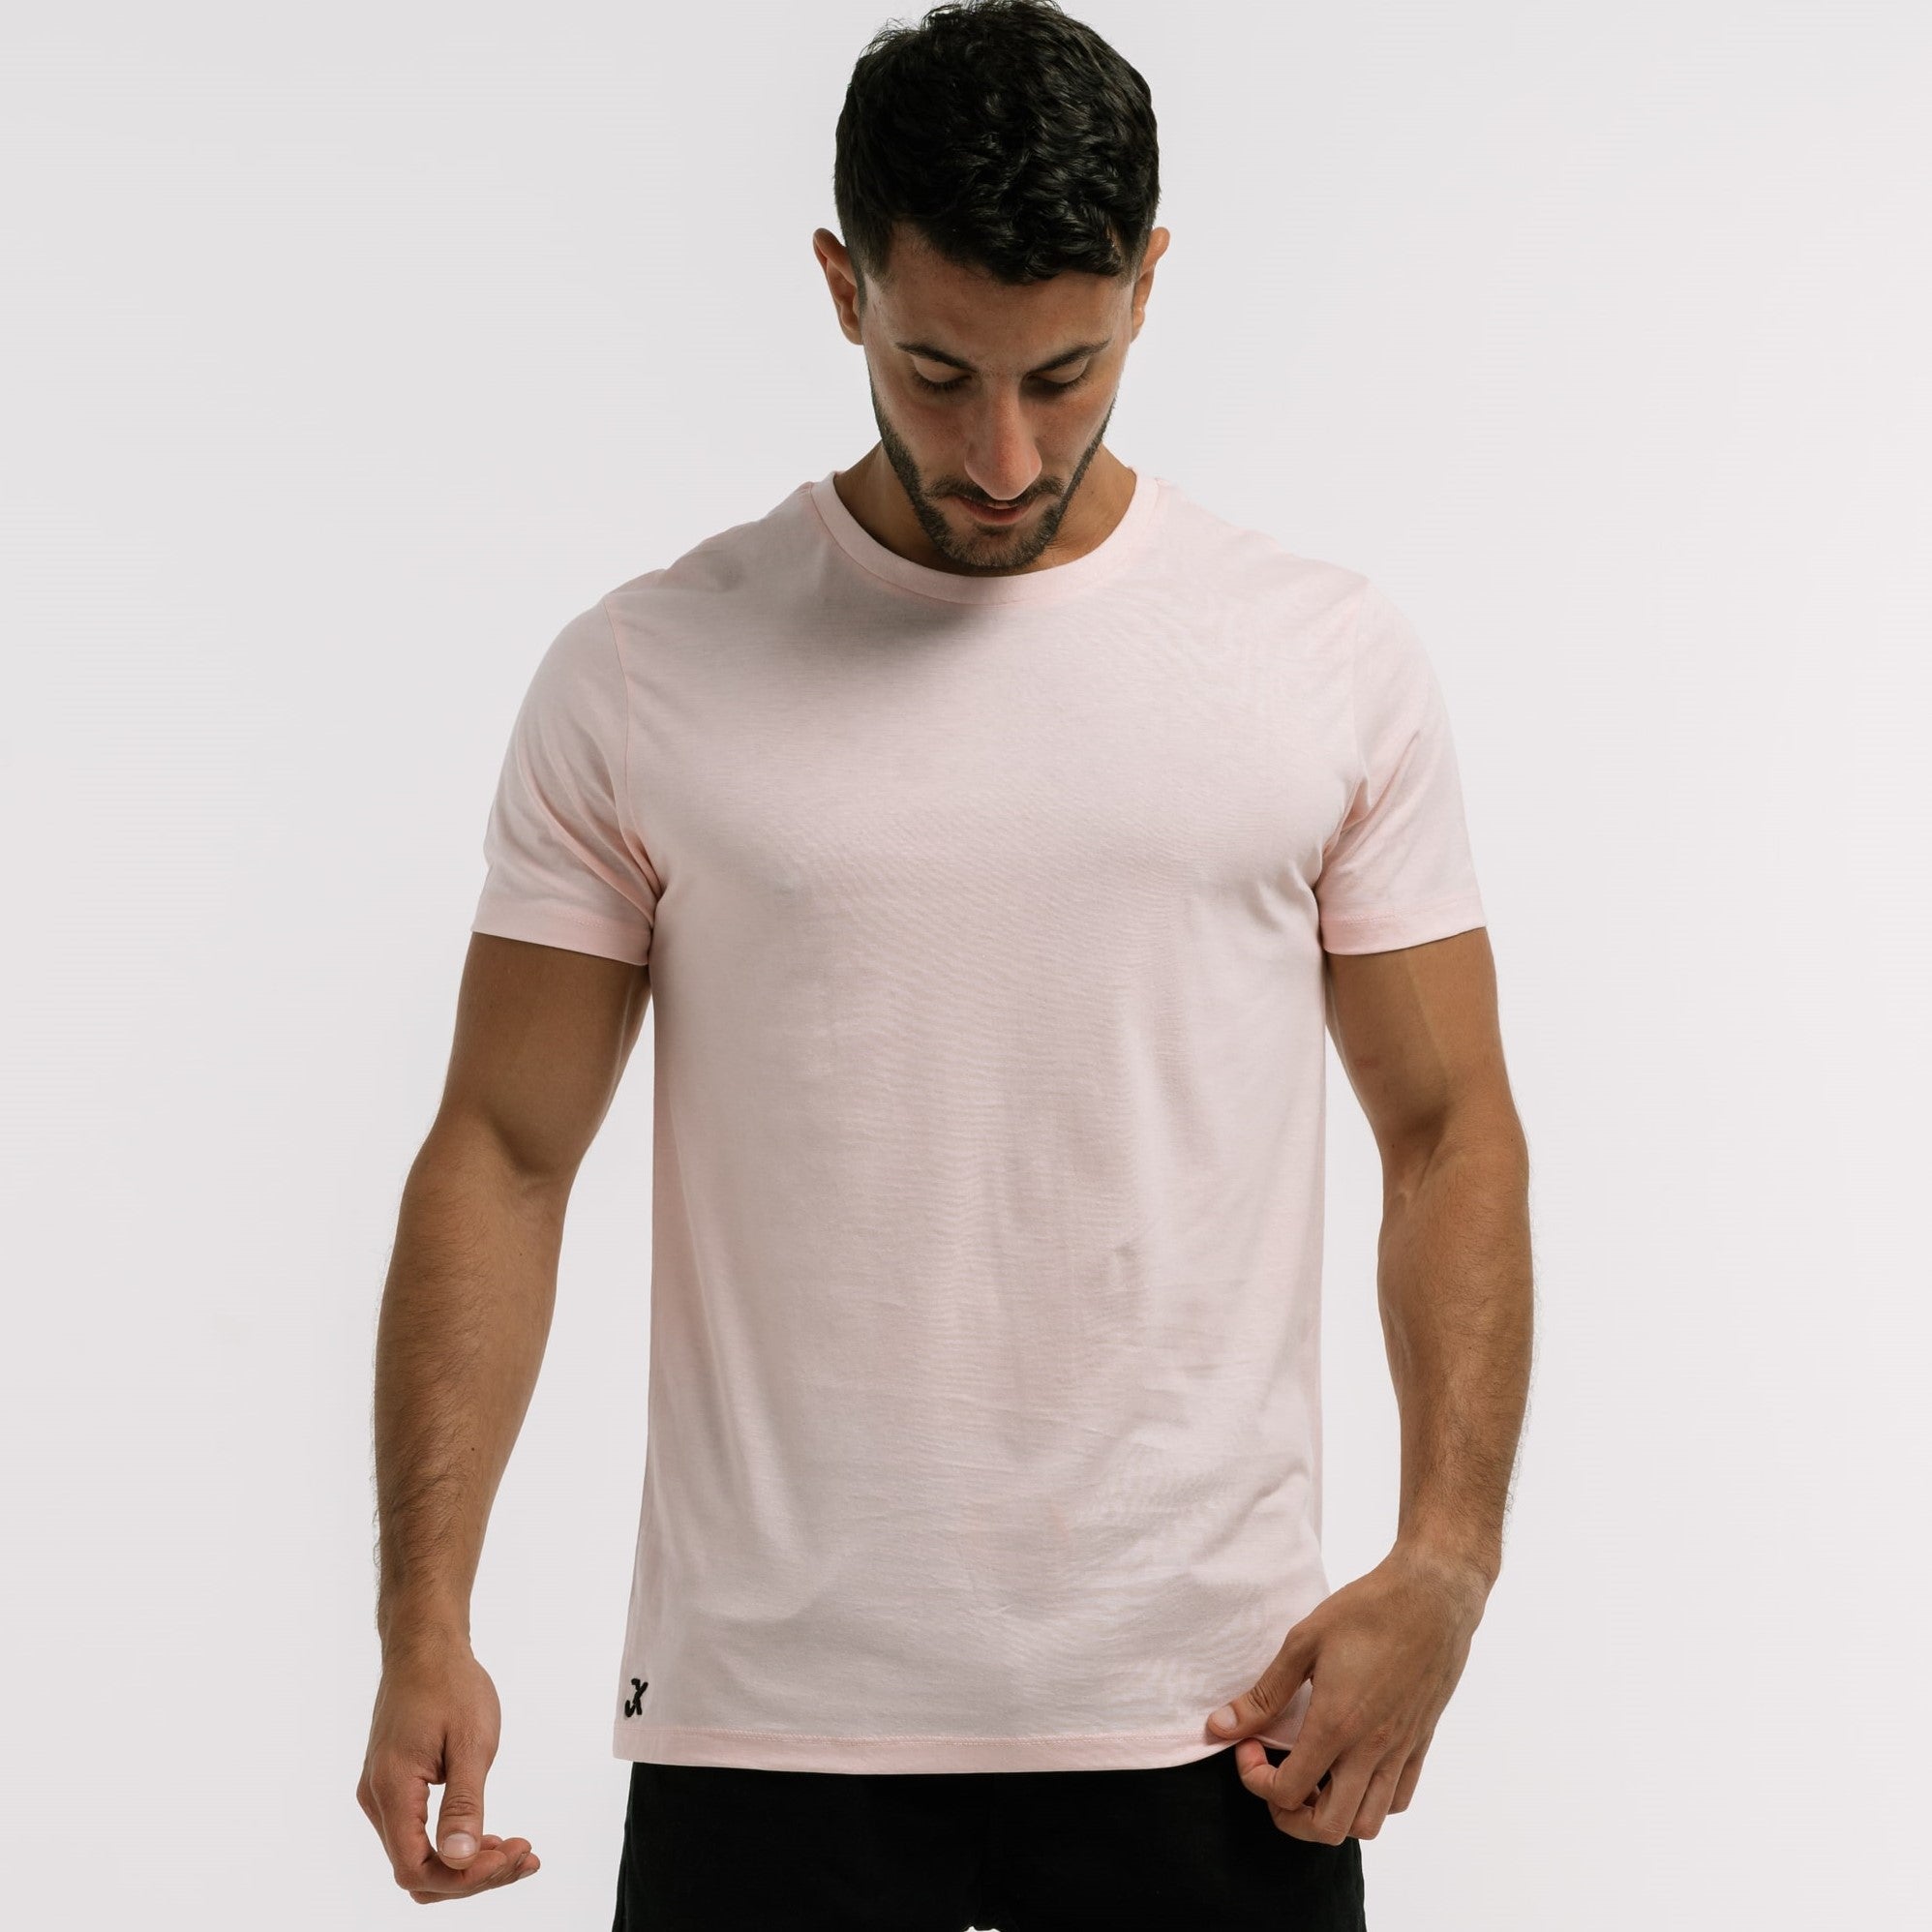 Classic-ultra tee Giza cotton -home page